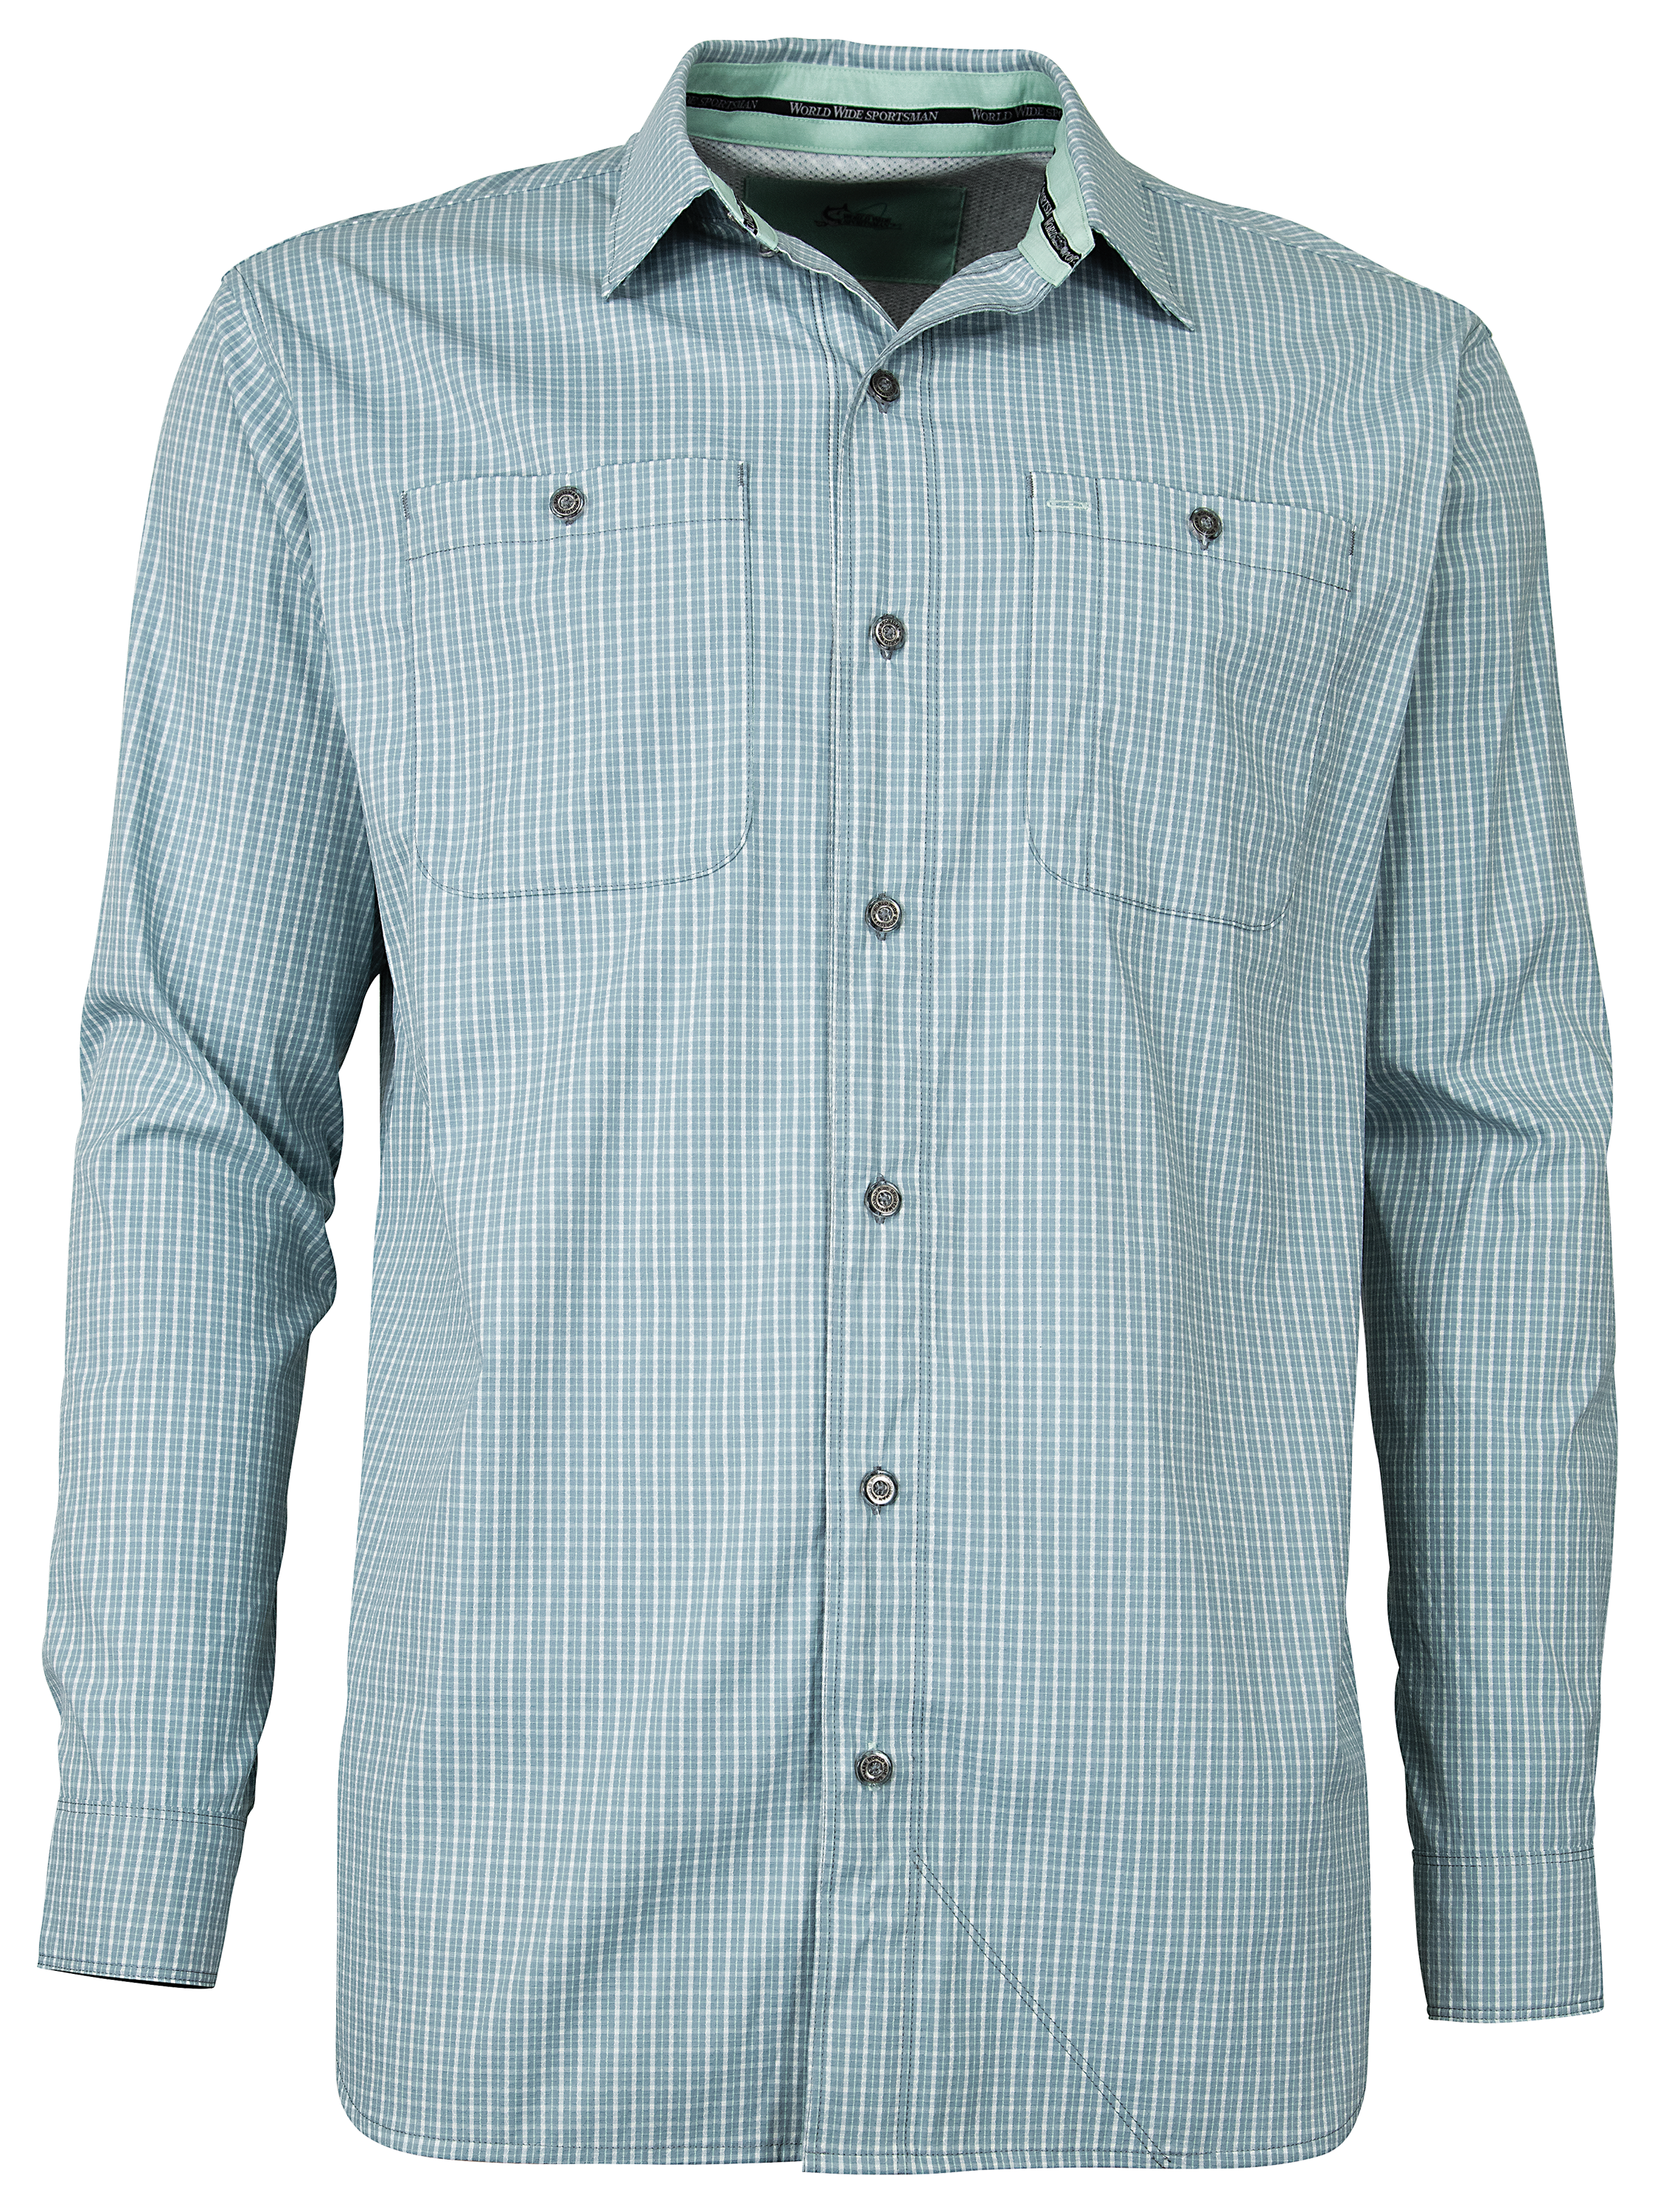 World Wide Sportsman Quick-Dry Button-Down Long-Sleeve for Men